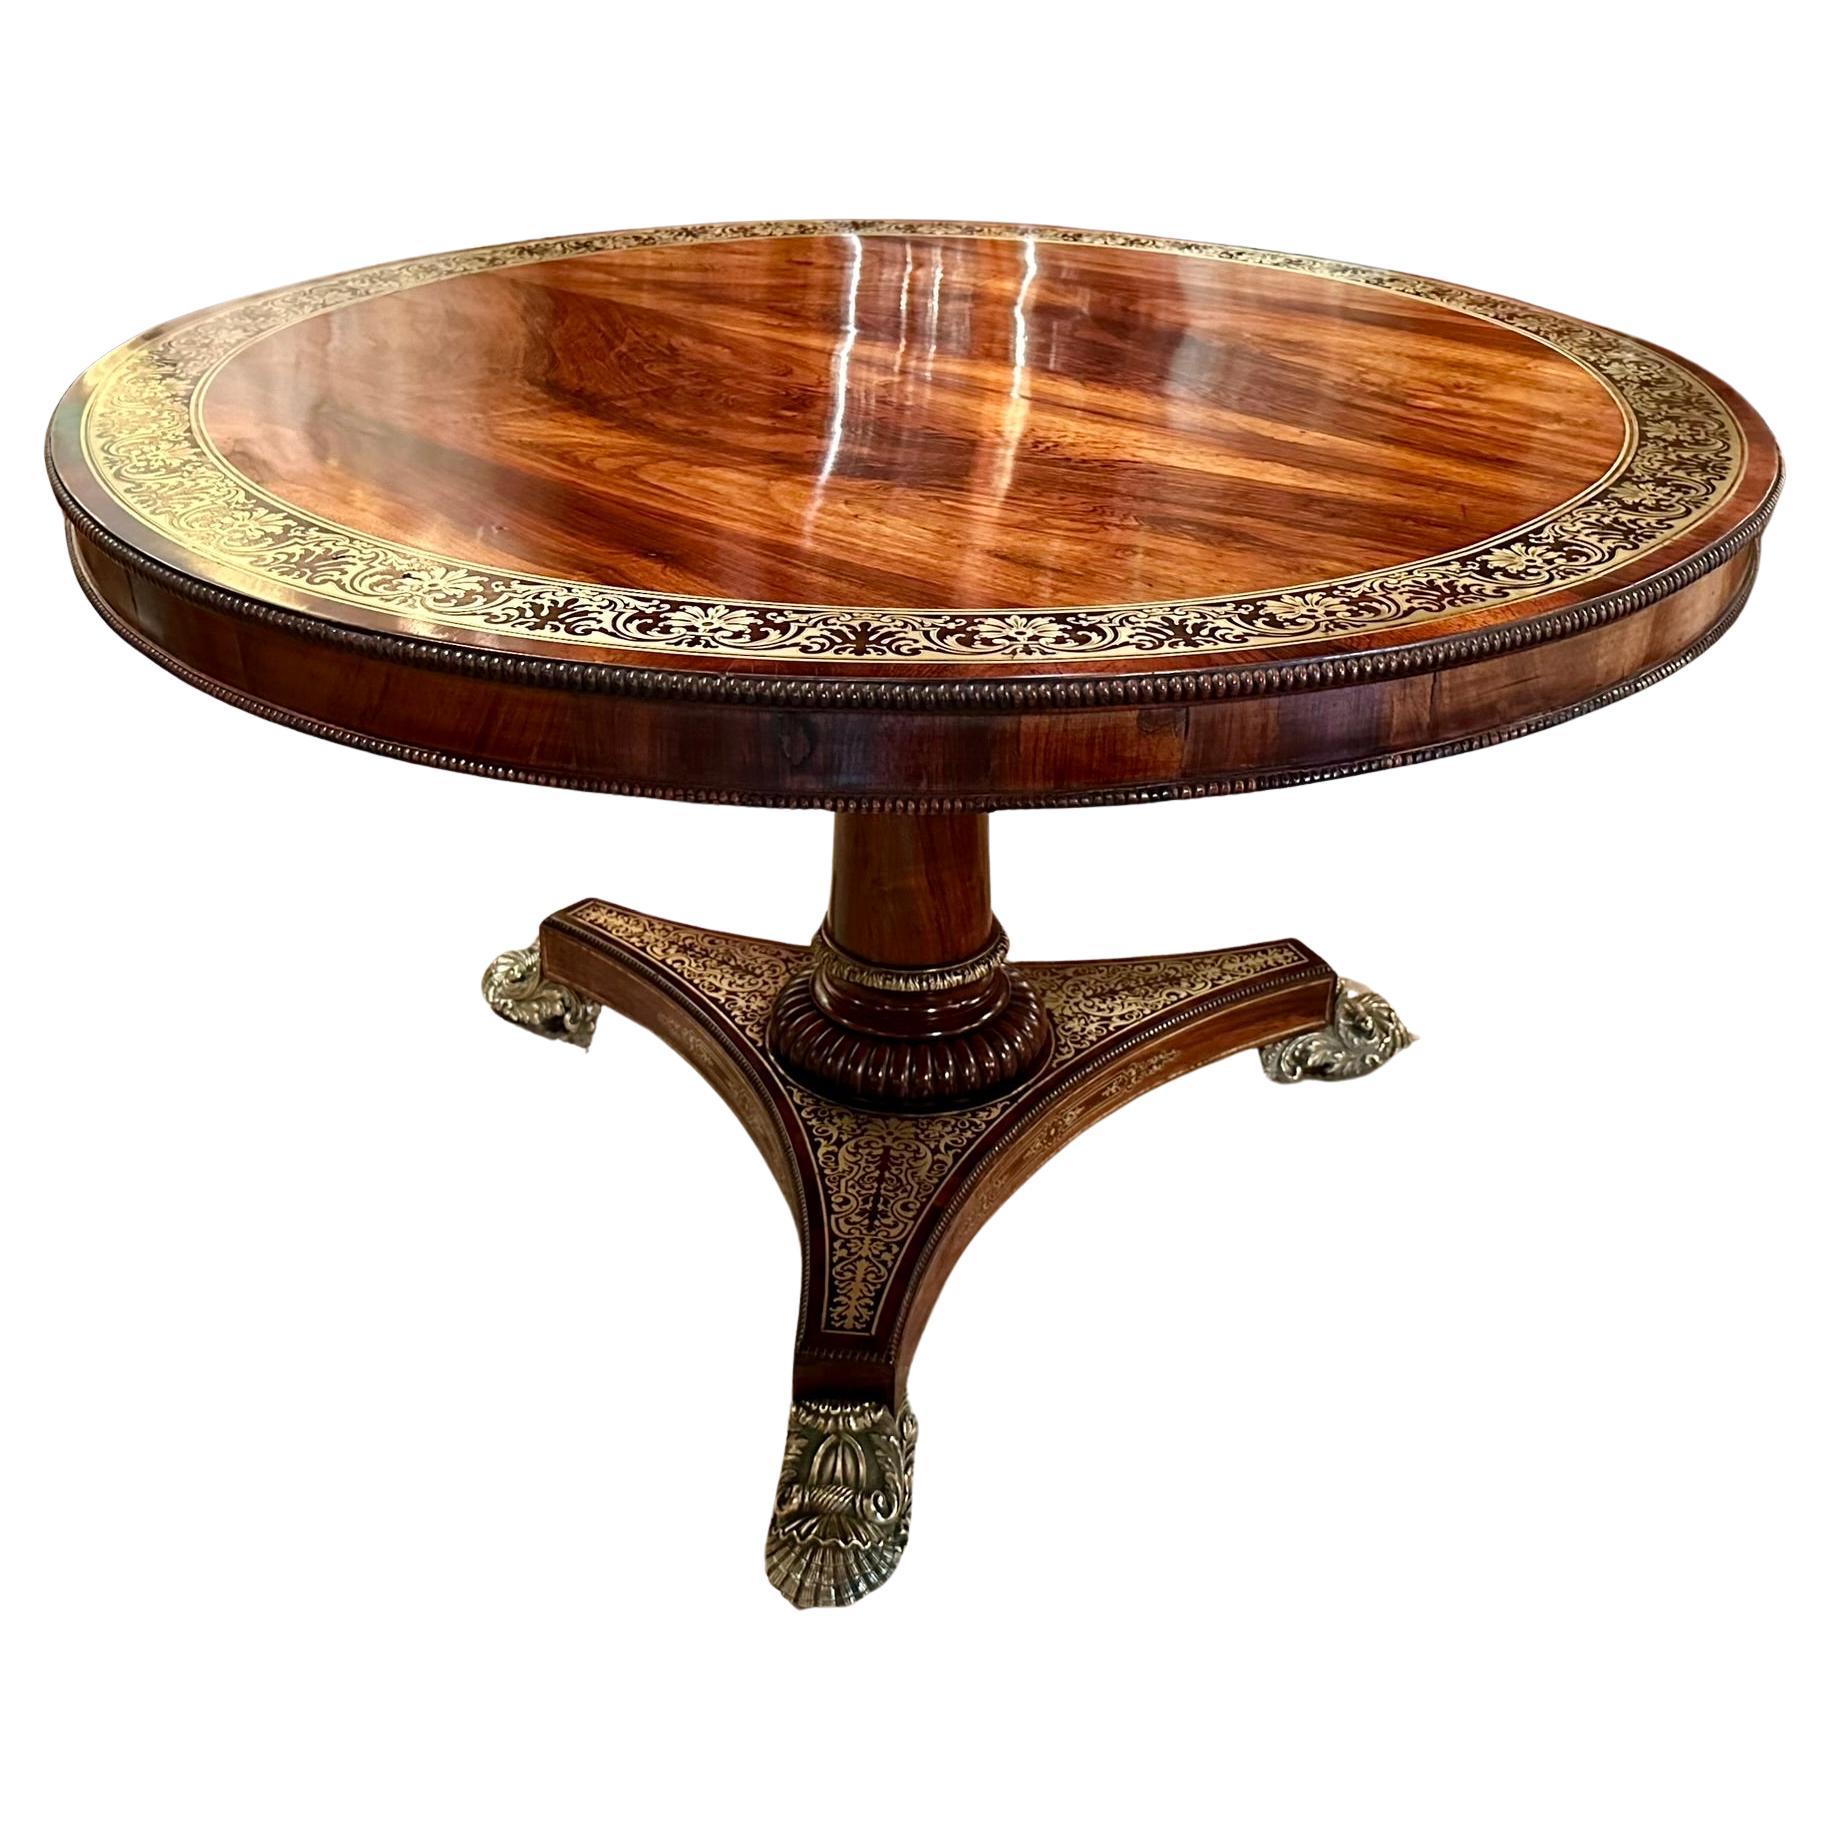 Antique English Regency Rosewood with Brass Inlay Tilt Top Center Table, Ca 1830